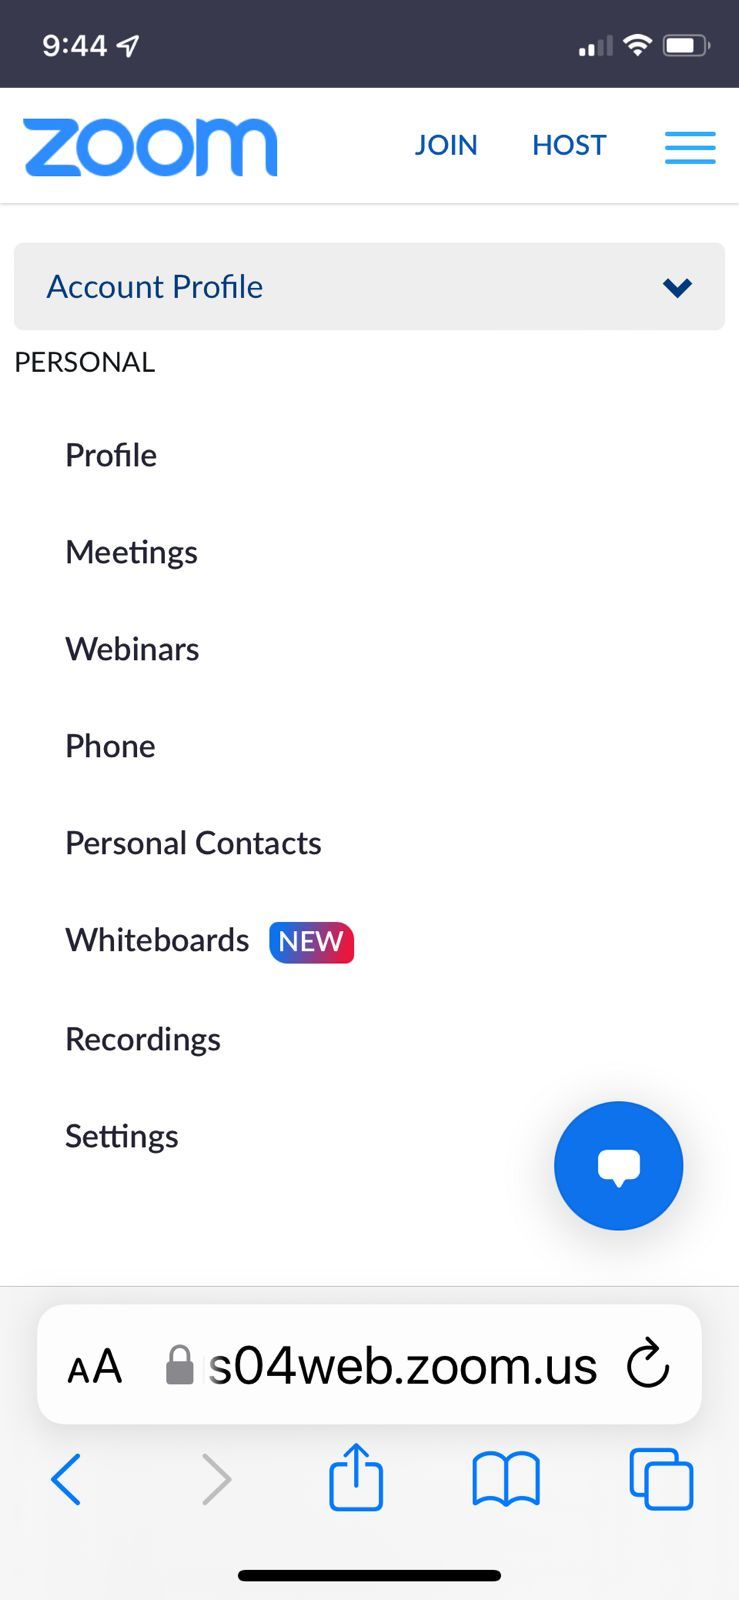 Selecting Profile Settings From Account Profile Dropdown on Zoom Website